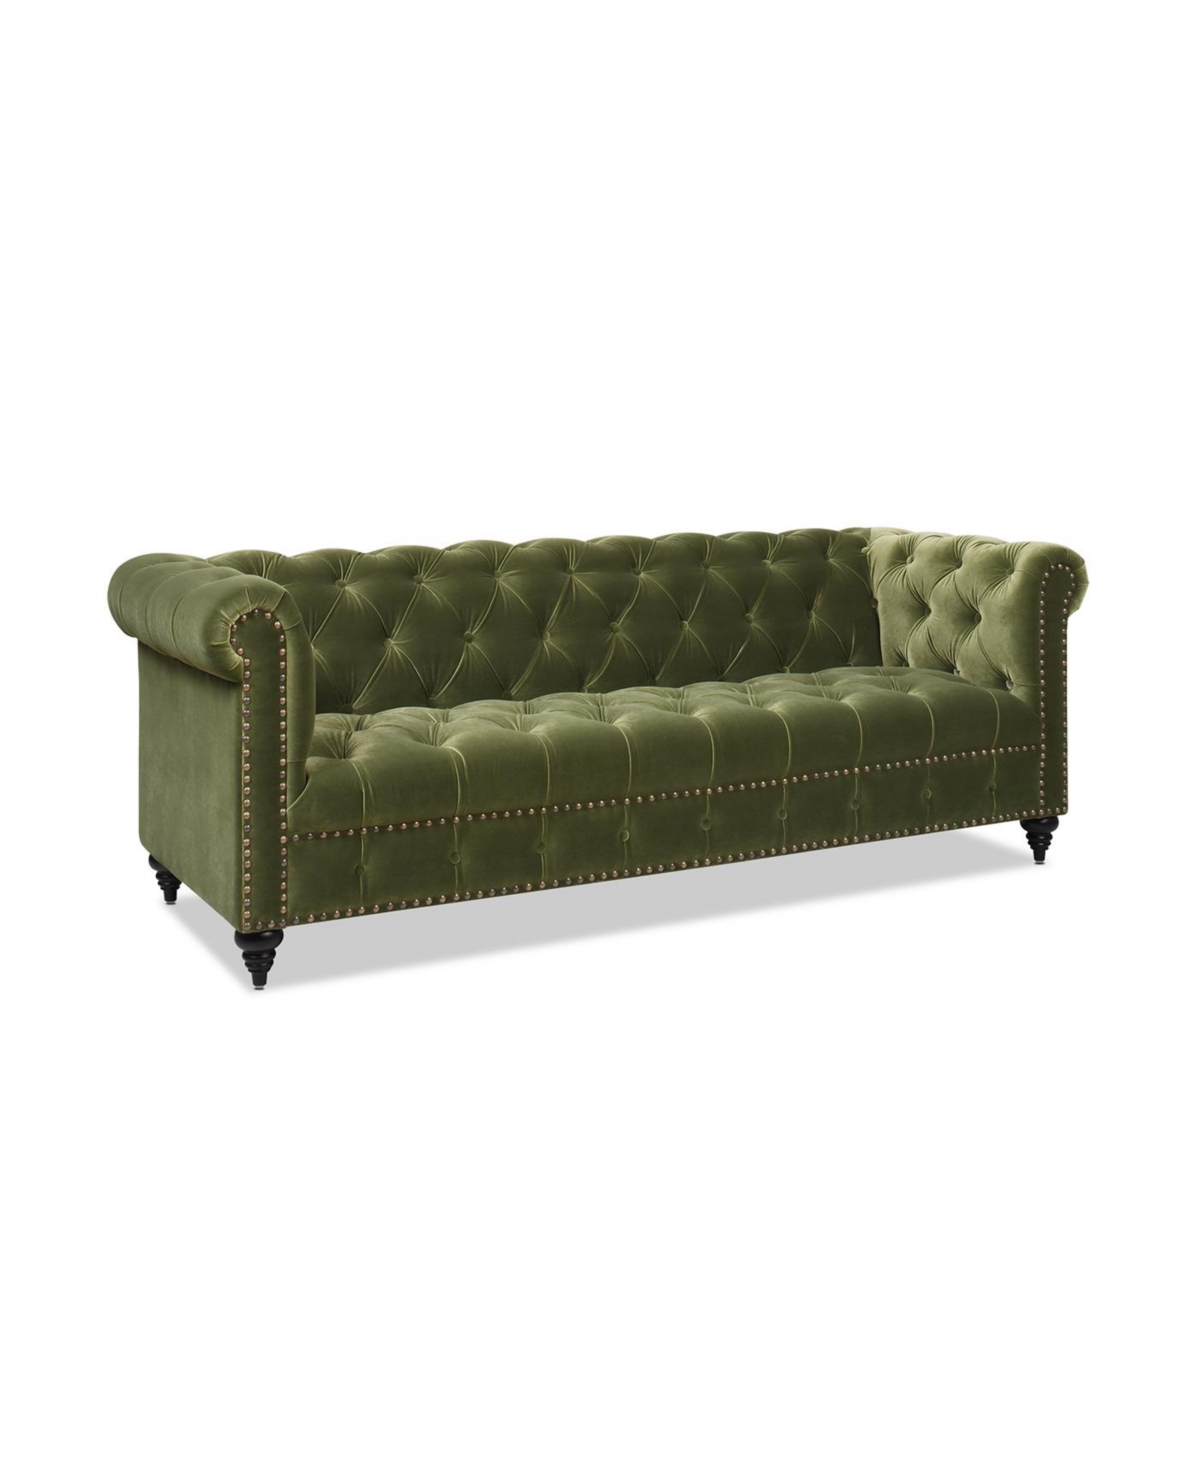 Jennifer Taylor Home Alto 88" Tufted Chesterfield Sofa In Olive Green